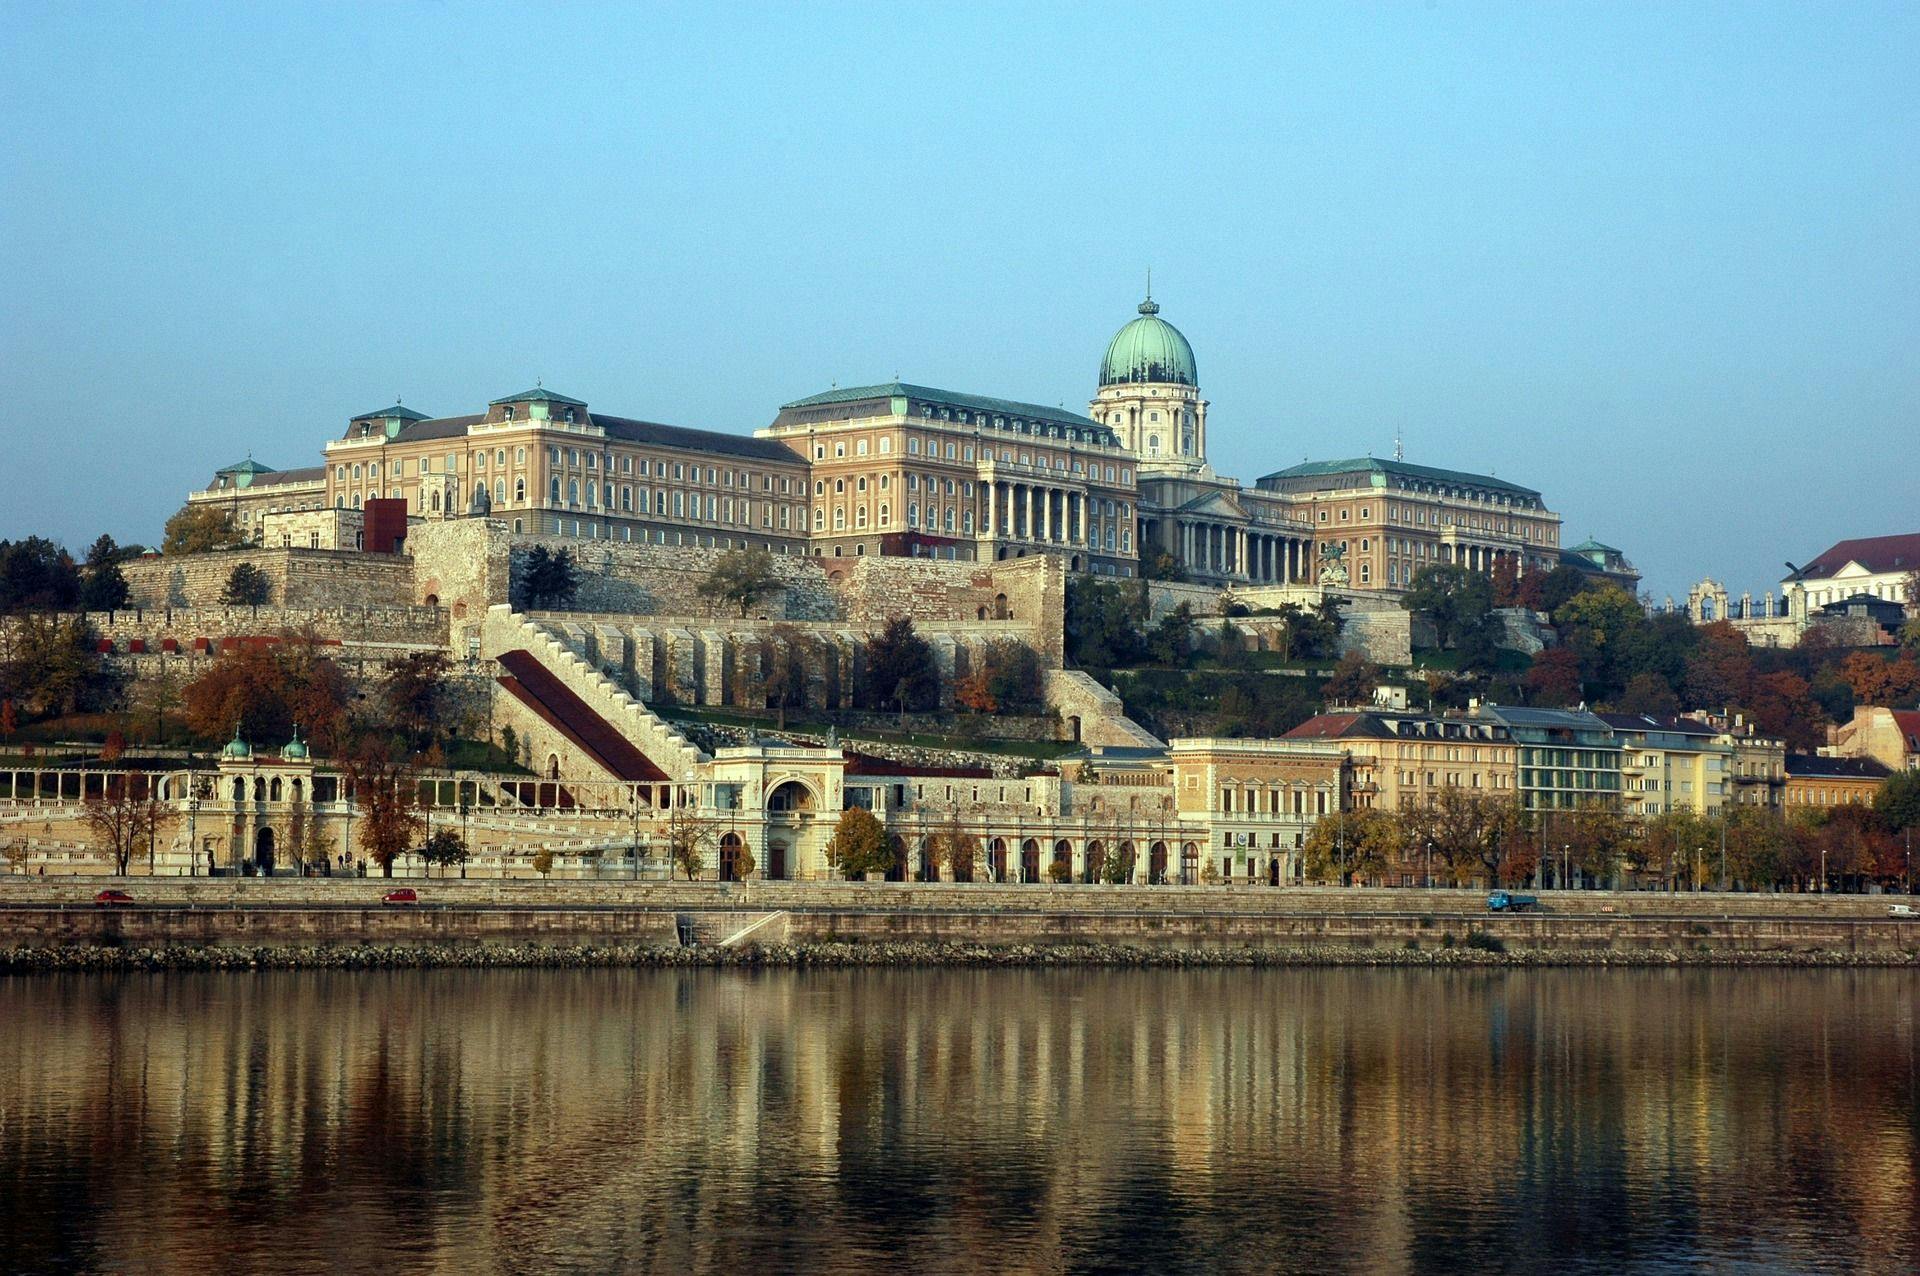 Buda Castle 3-hour tour with a friendly historian